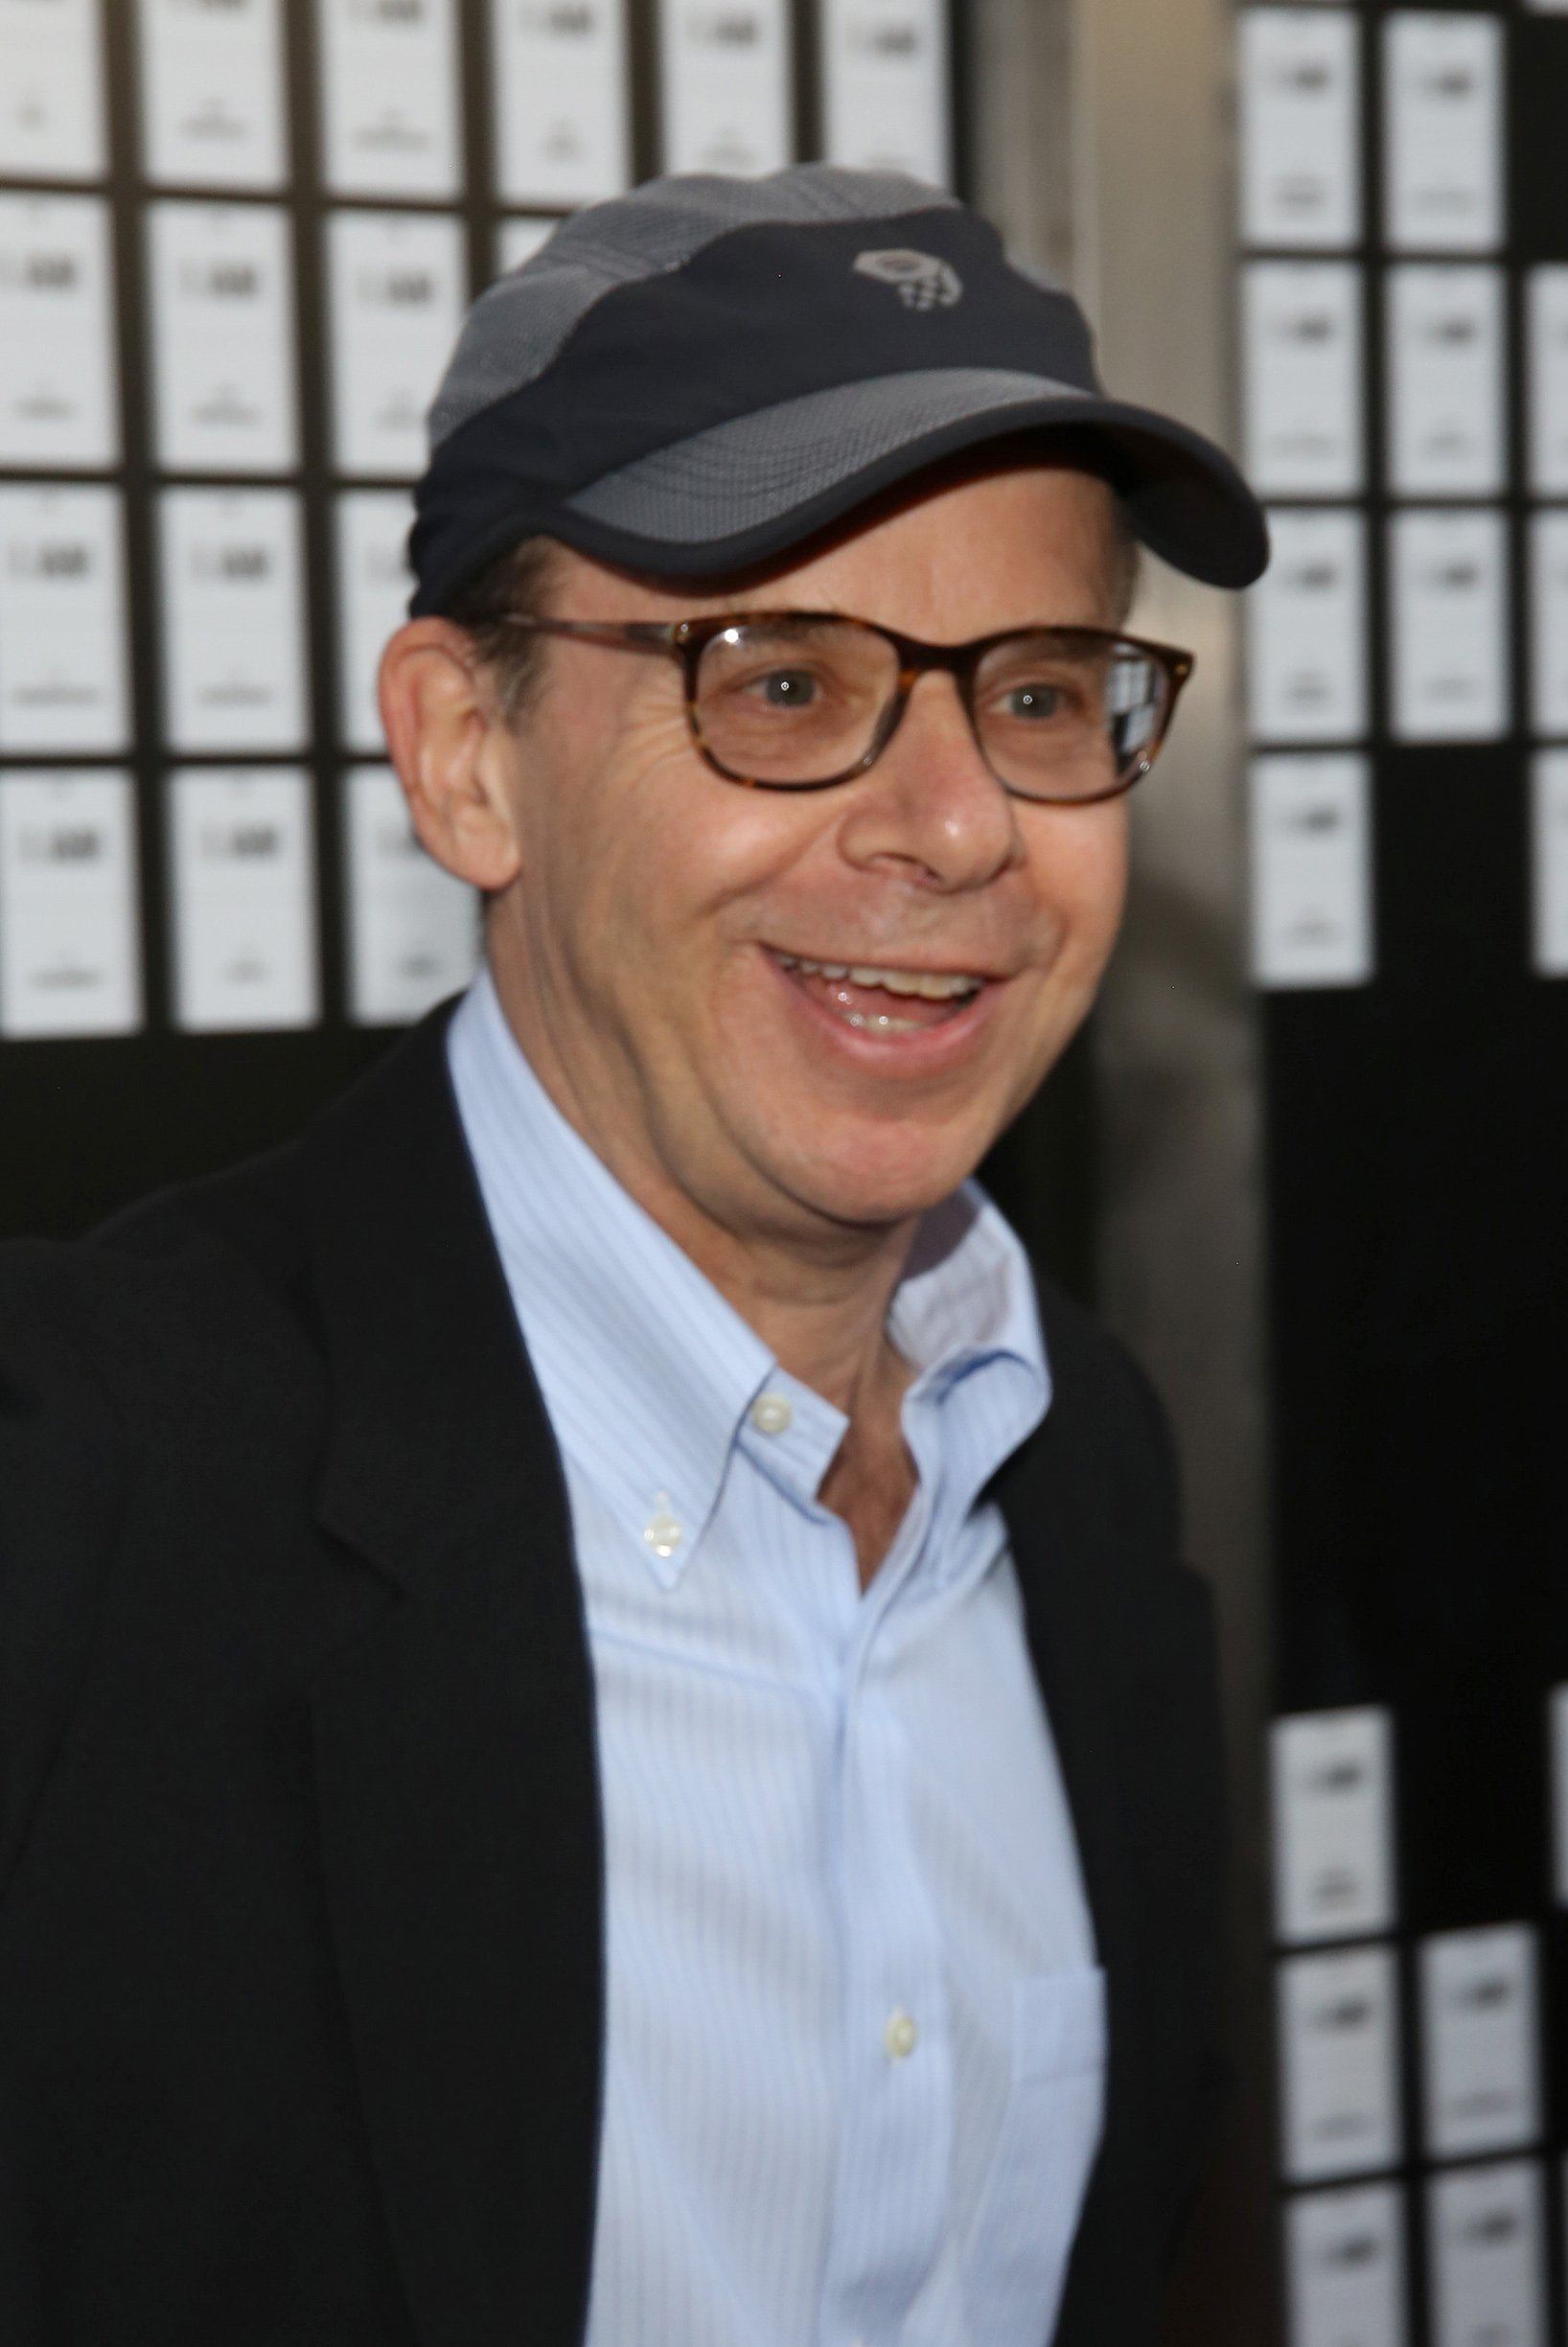 Rick Moranis attending the opening night of 'In & Of Itself' at the Daryl Roth Theatre on April 12, 2017 in New York City. | Source: Getty Images